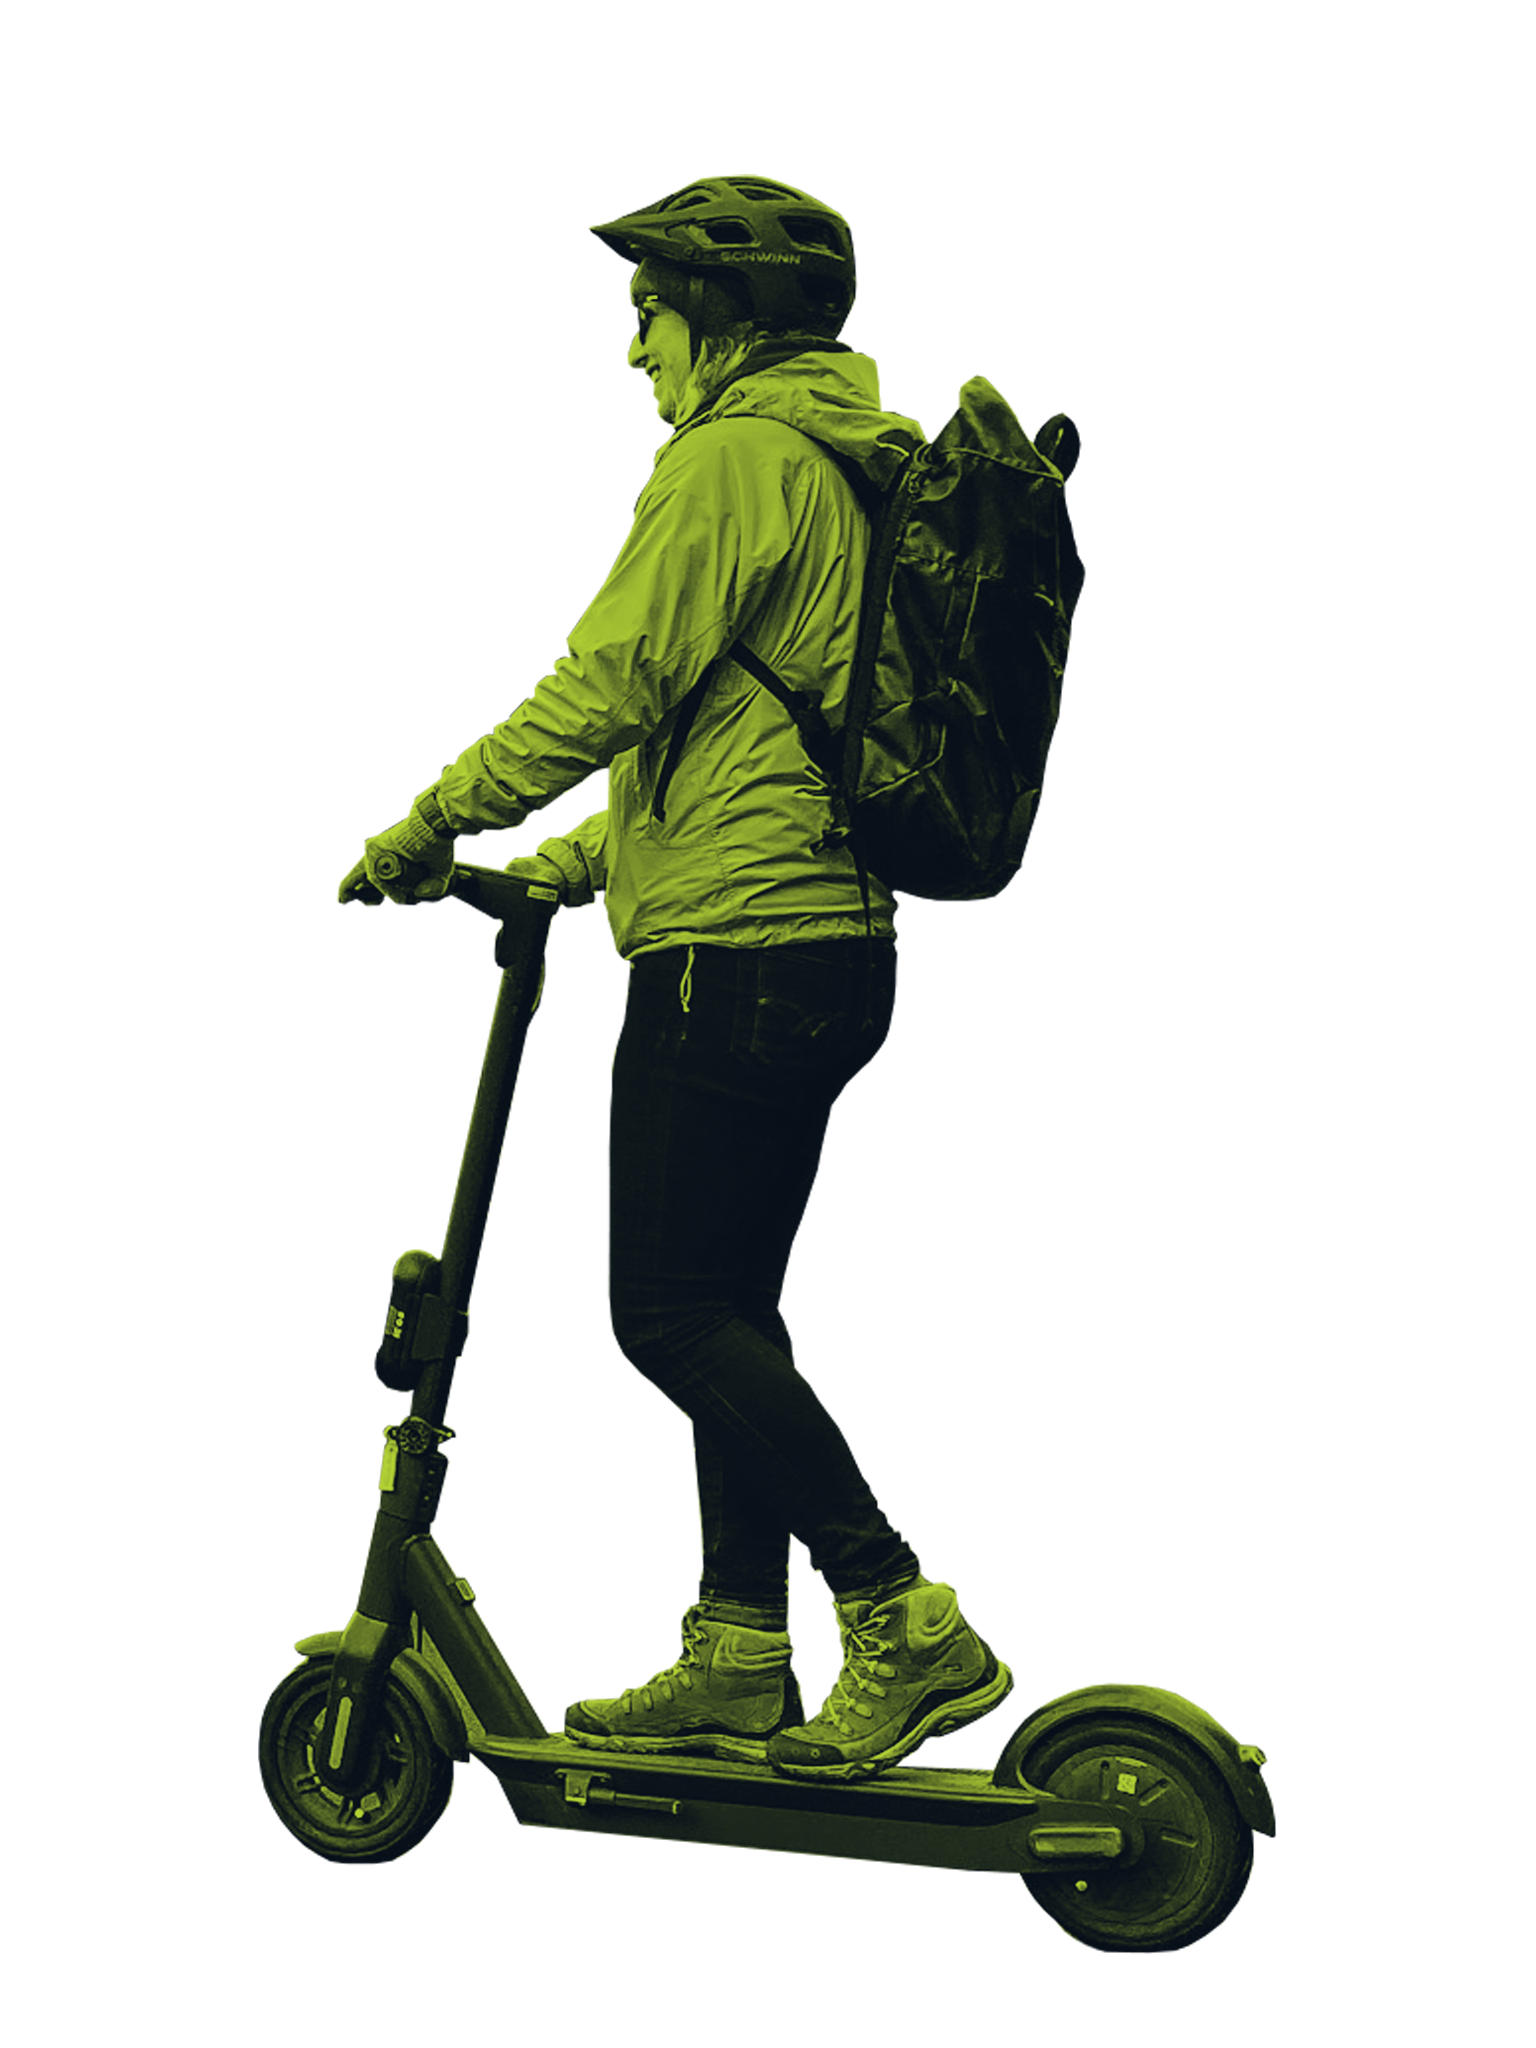 Our mission is to make micro-mobility seamless. - For our riders that means no more downloading apps, scanning QR codes, and looking for scooters when you want to go on an adventure. To our city partners what we offer is more cars off the road, with less scooter clutter on the streets, and a commitment to safety that we deliver on.